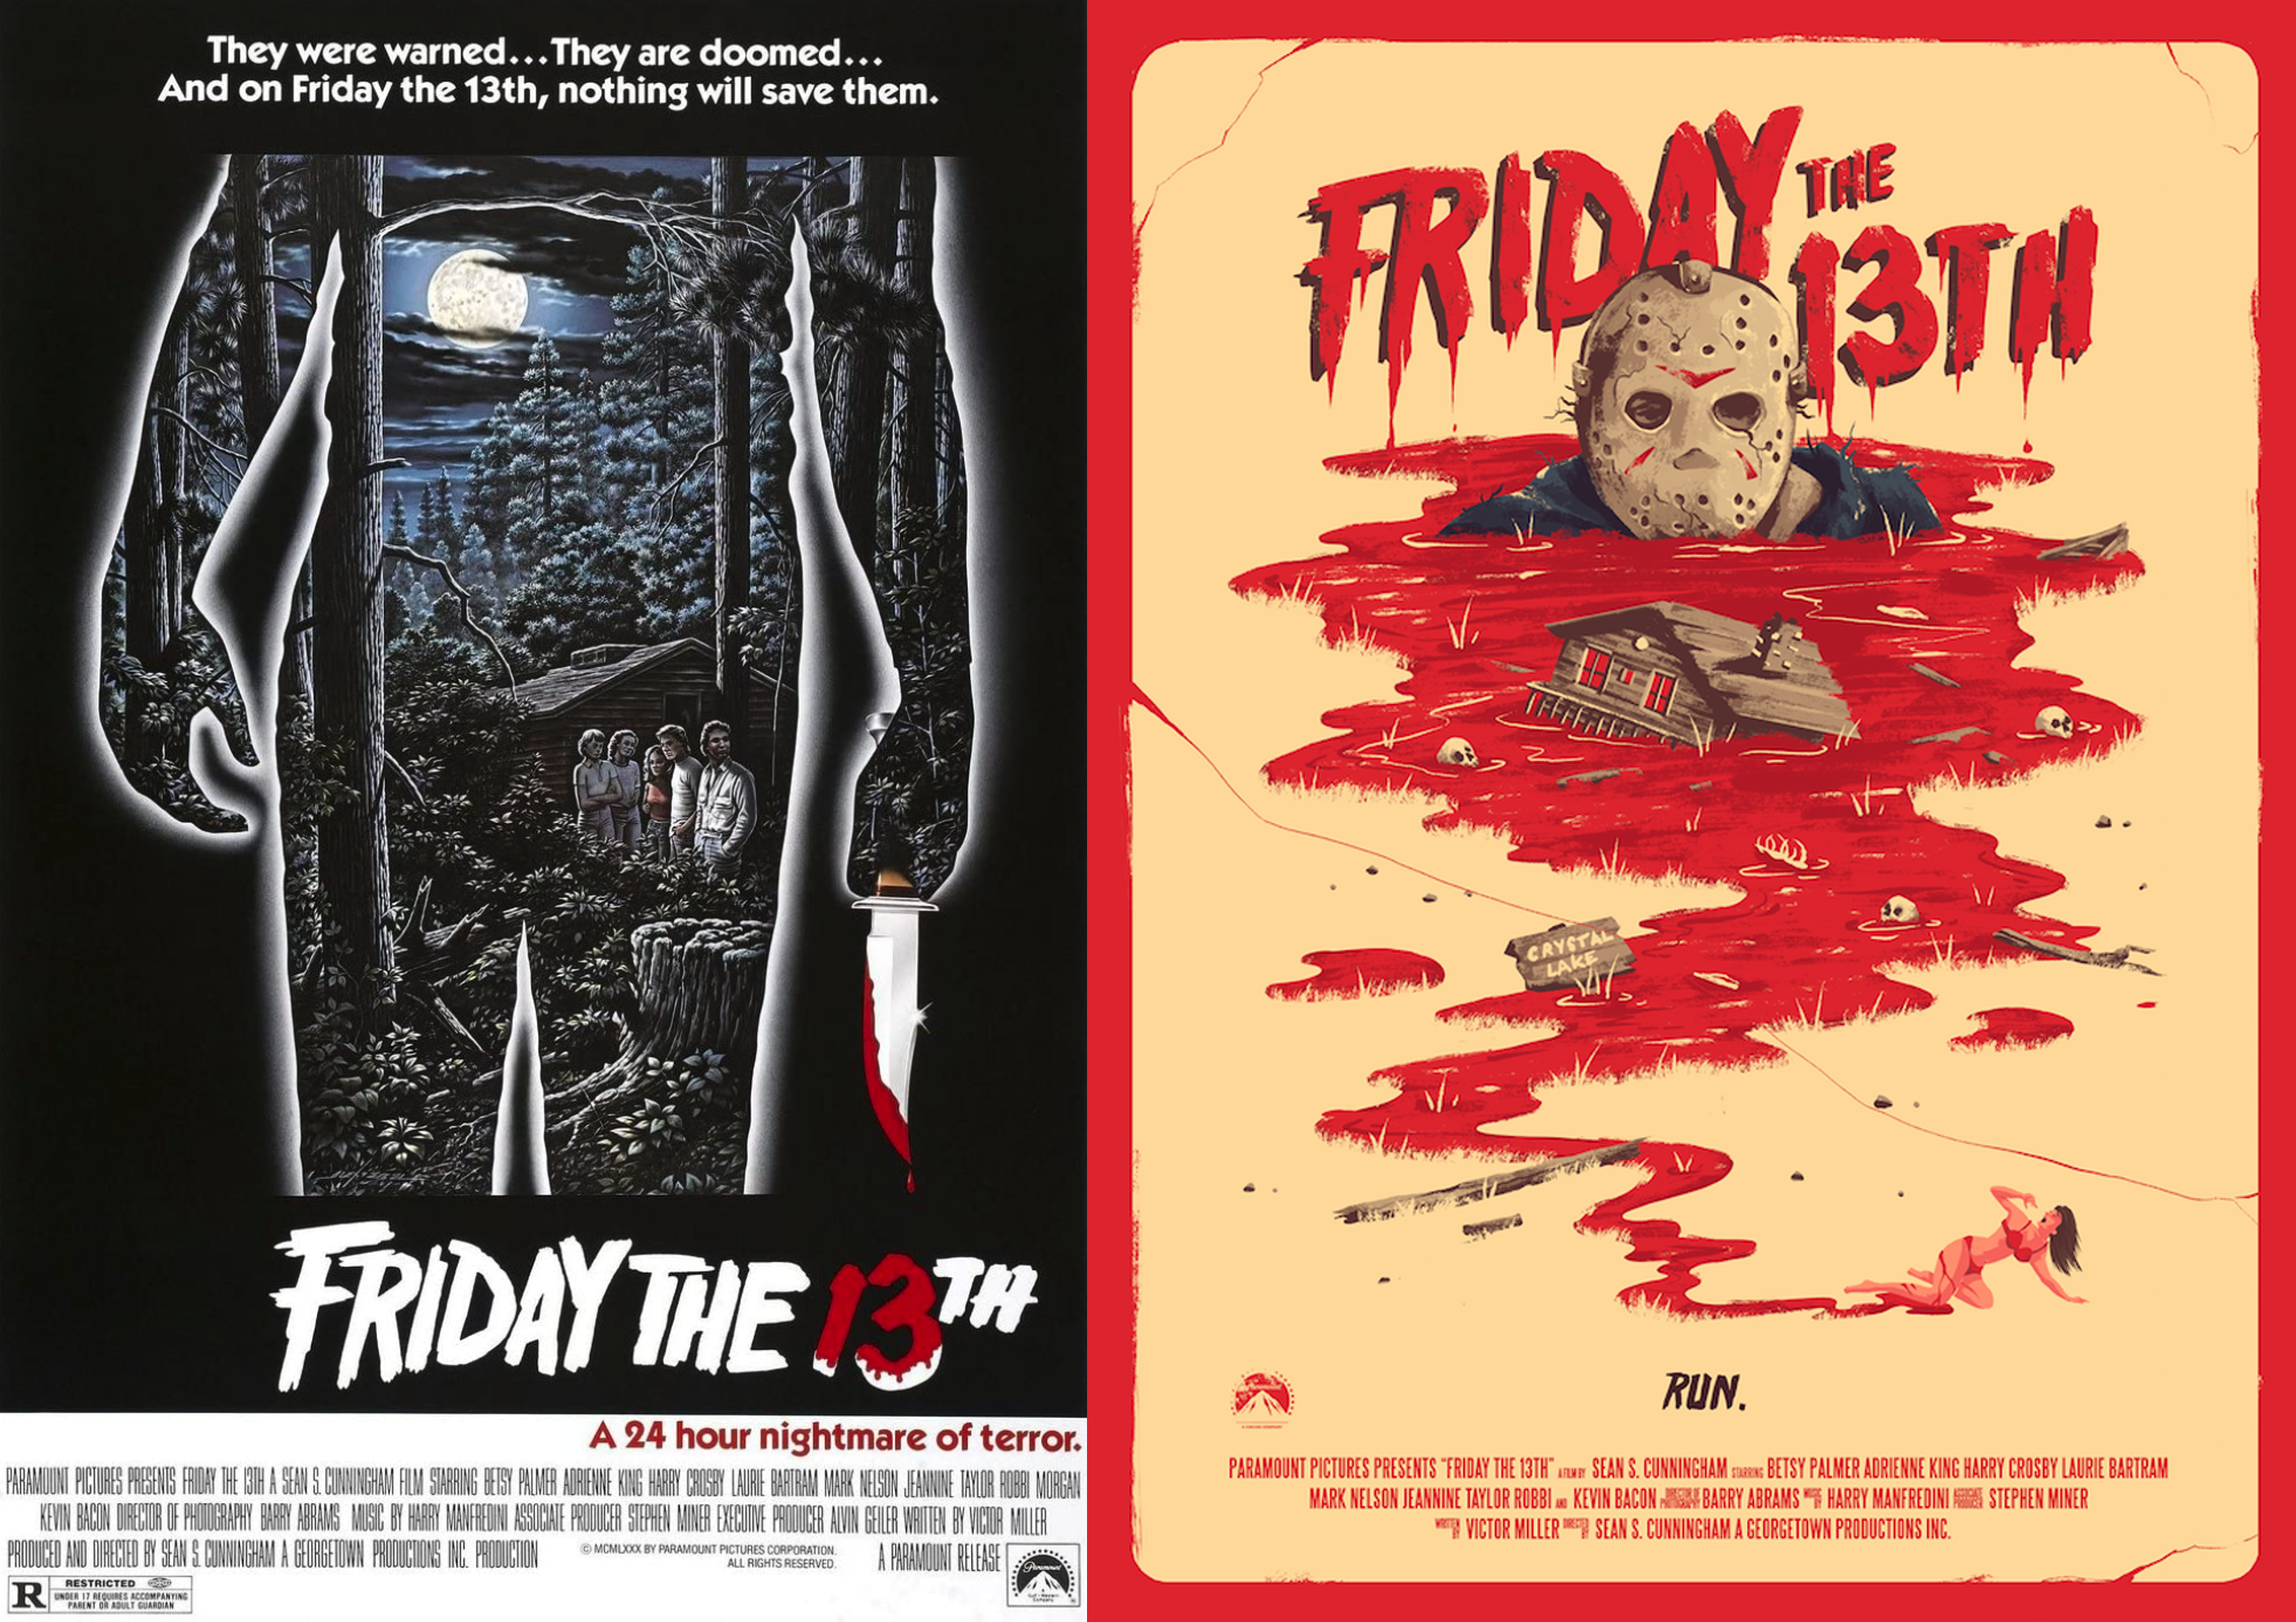 Original Friday 13th posters